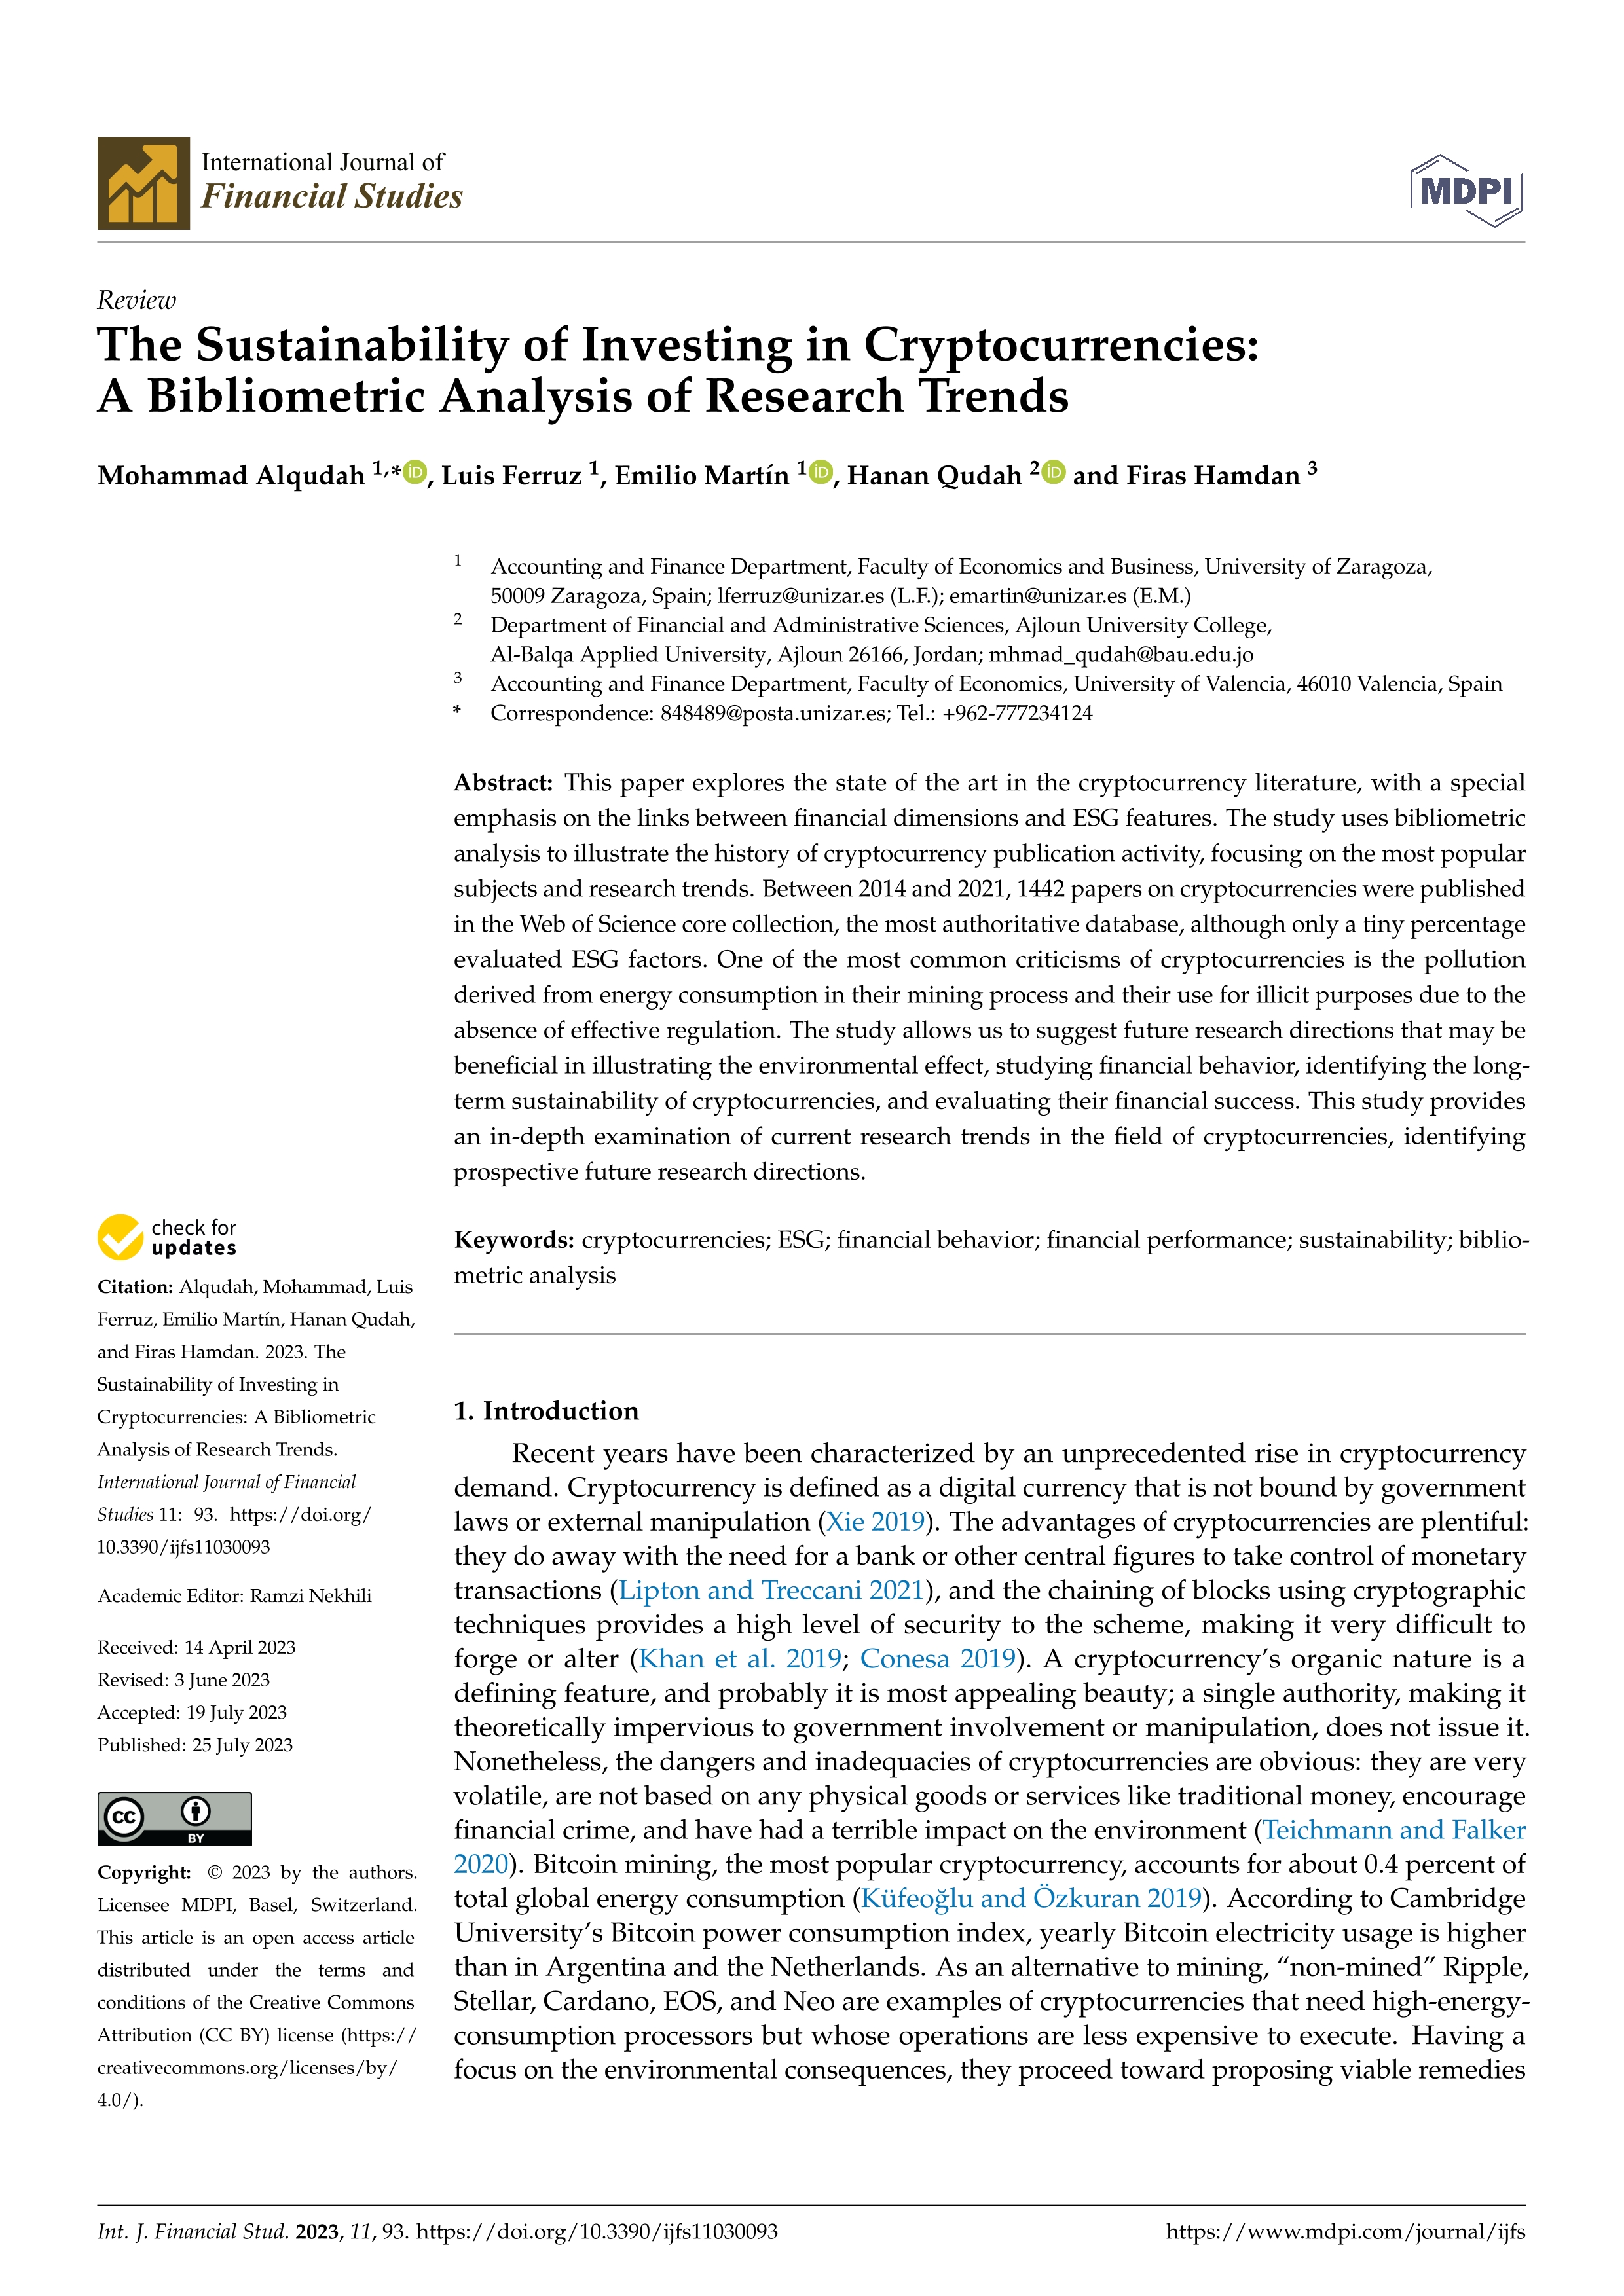 The sustainability of investing in cryptocurrencies: a bibliometric analysis of research trends